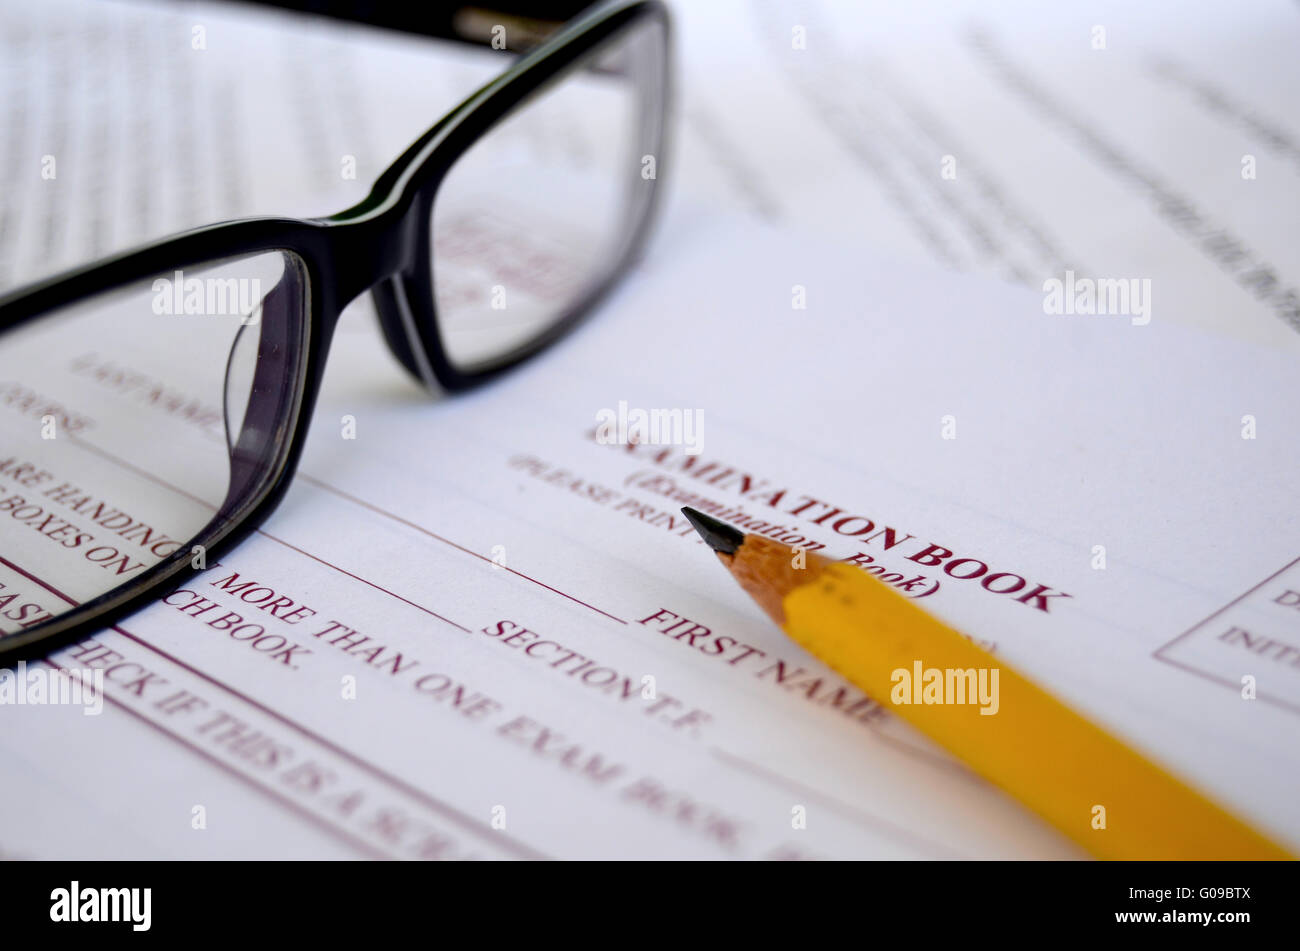 Close up of a pencil and some glasses on a university examination book Stock Photo